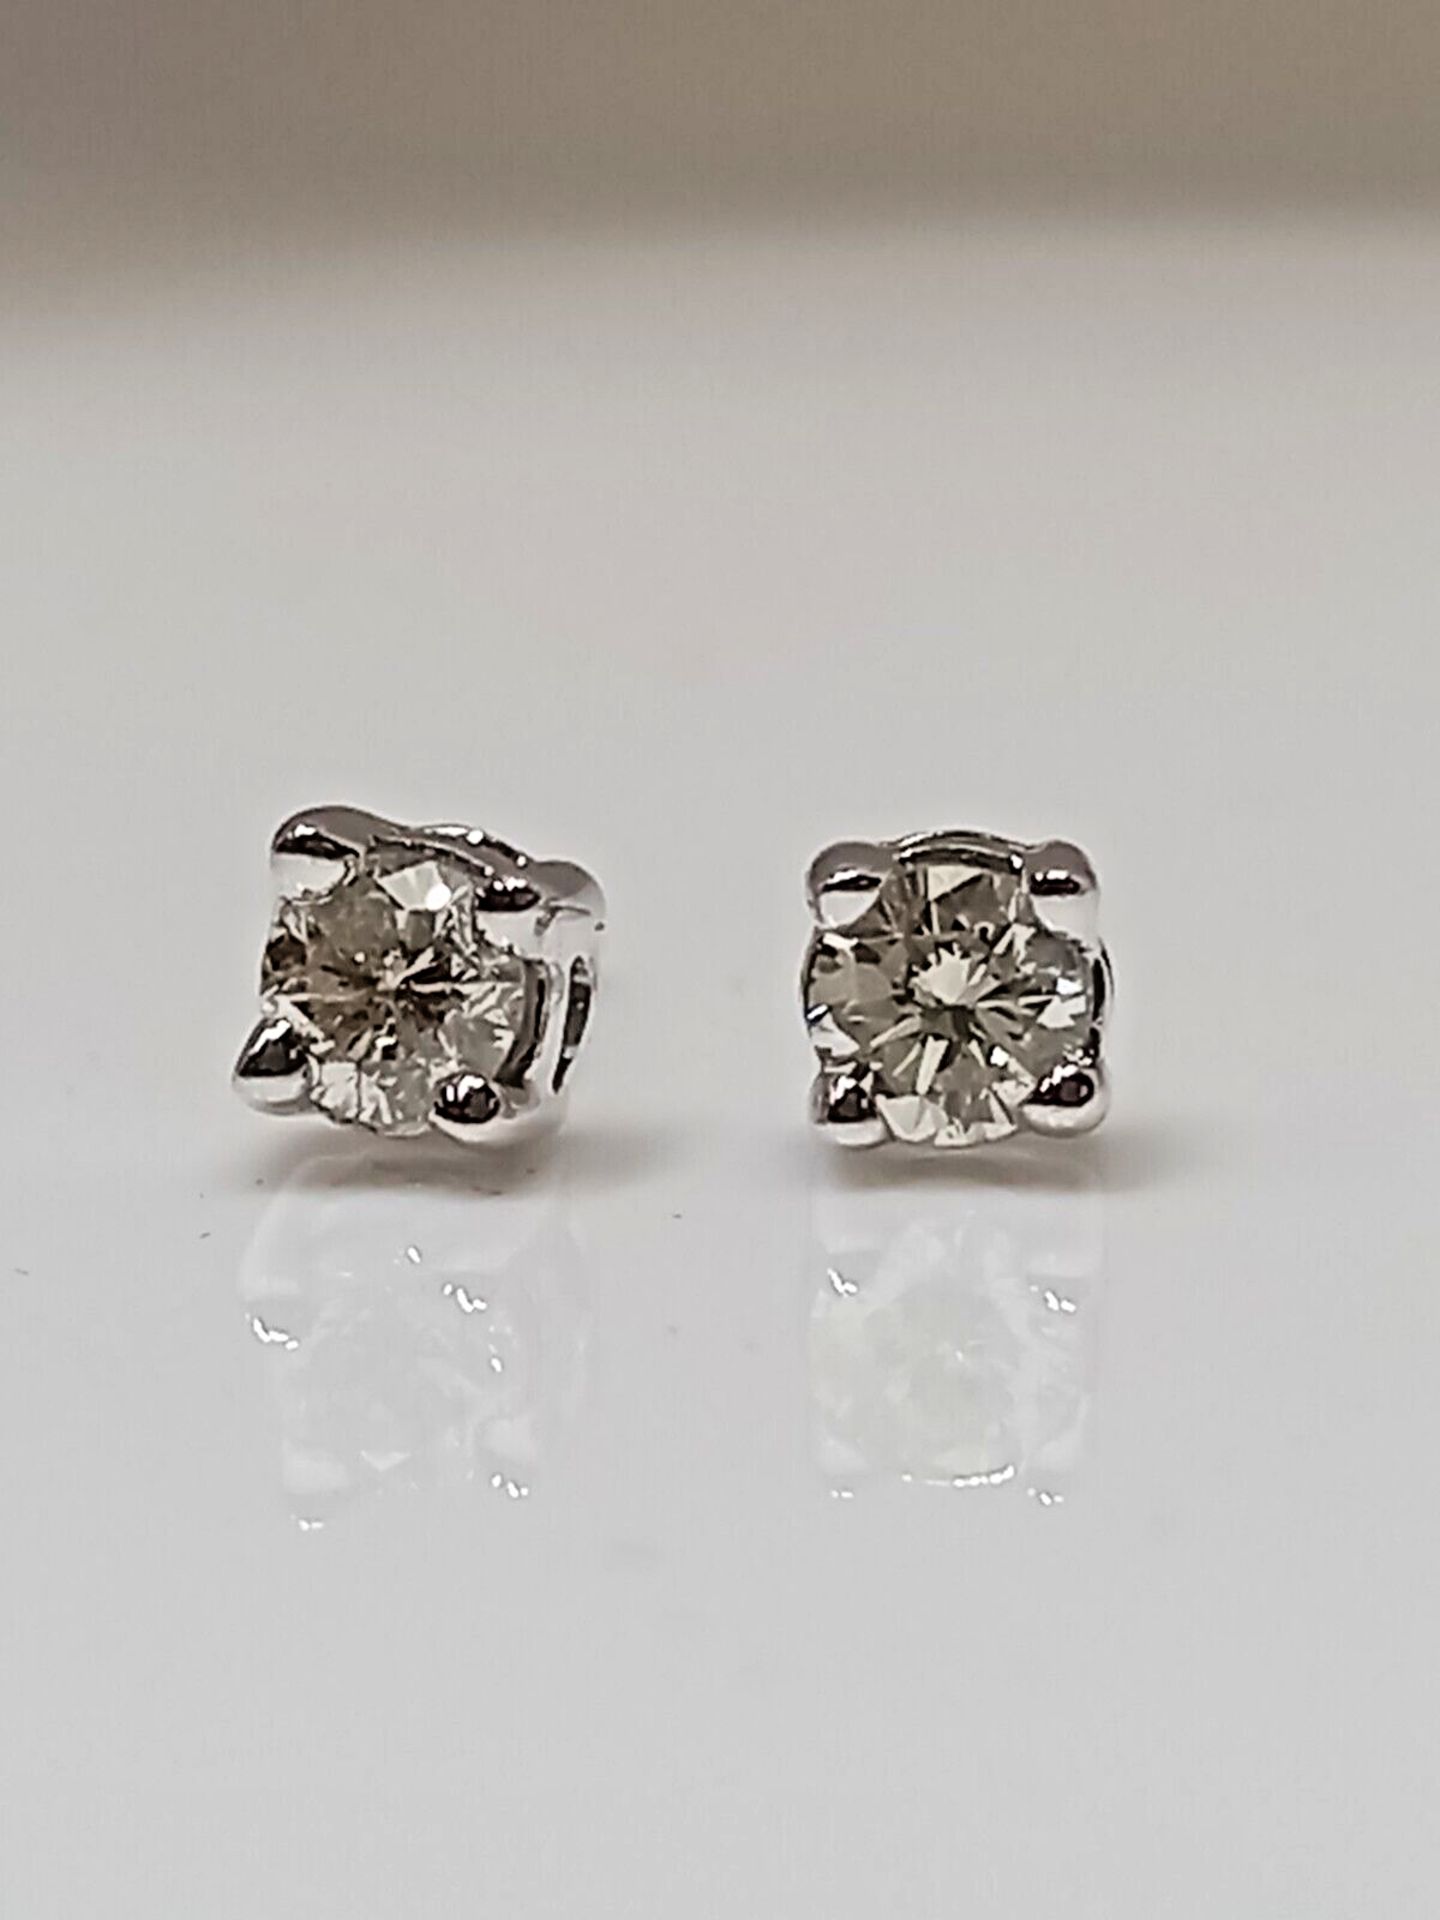 0.50CT DIAMOND STUD EARRINGS 18CT WHITE GOLD IN GIFT BOX WITH VALUATION CERTIFICATE OF £2495 - Image 5 of 5